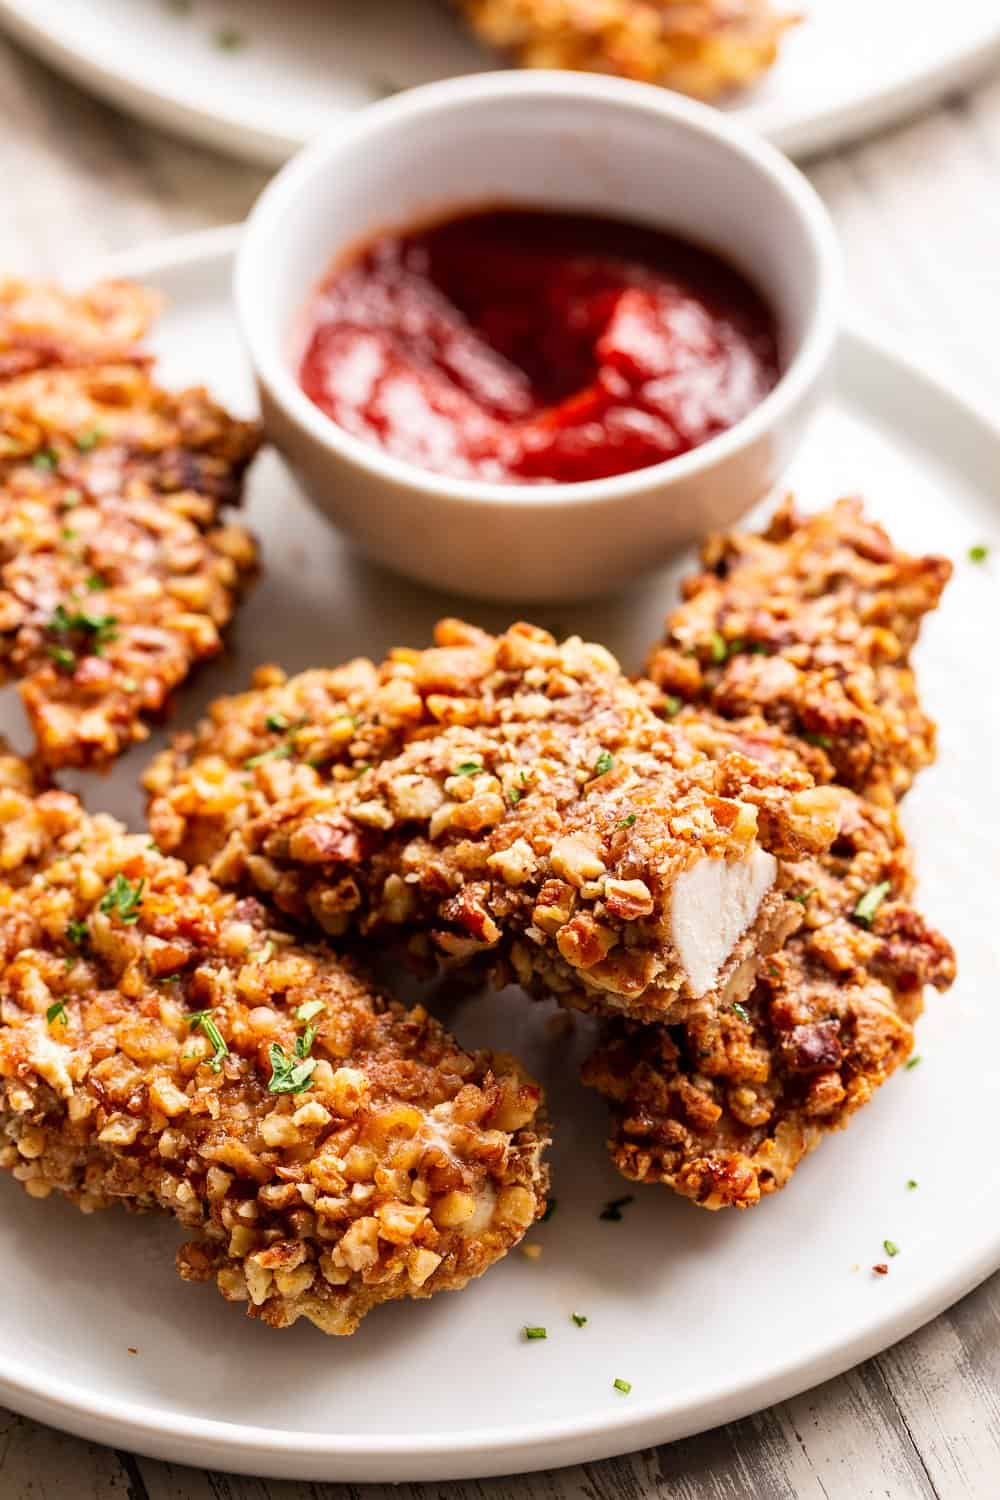 These pecan crusted chicken tenders are easy to throw together, baked in the oven and so tasty! Amazing with all your favorite dips and totally kid friendly, they're also paleo, Whole30 and keto friendly. #paleo #keto #cleaneating #chicken #whole30